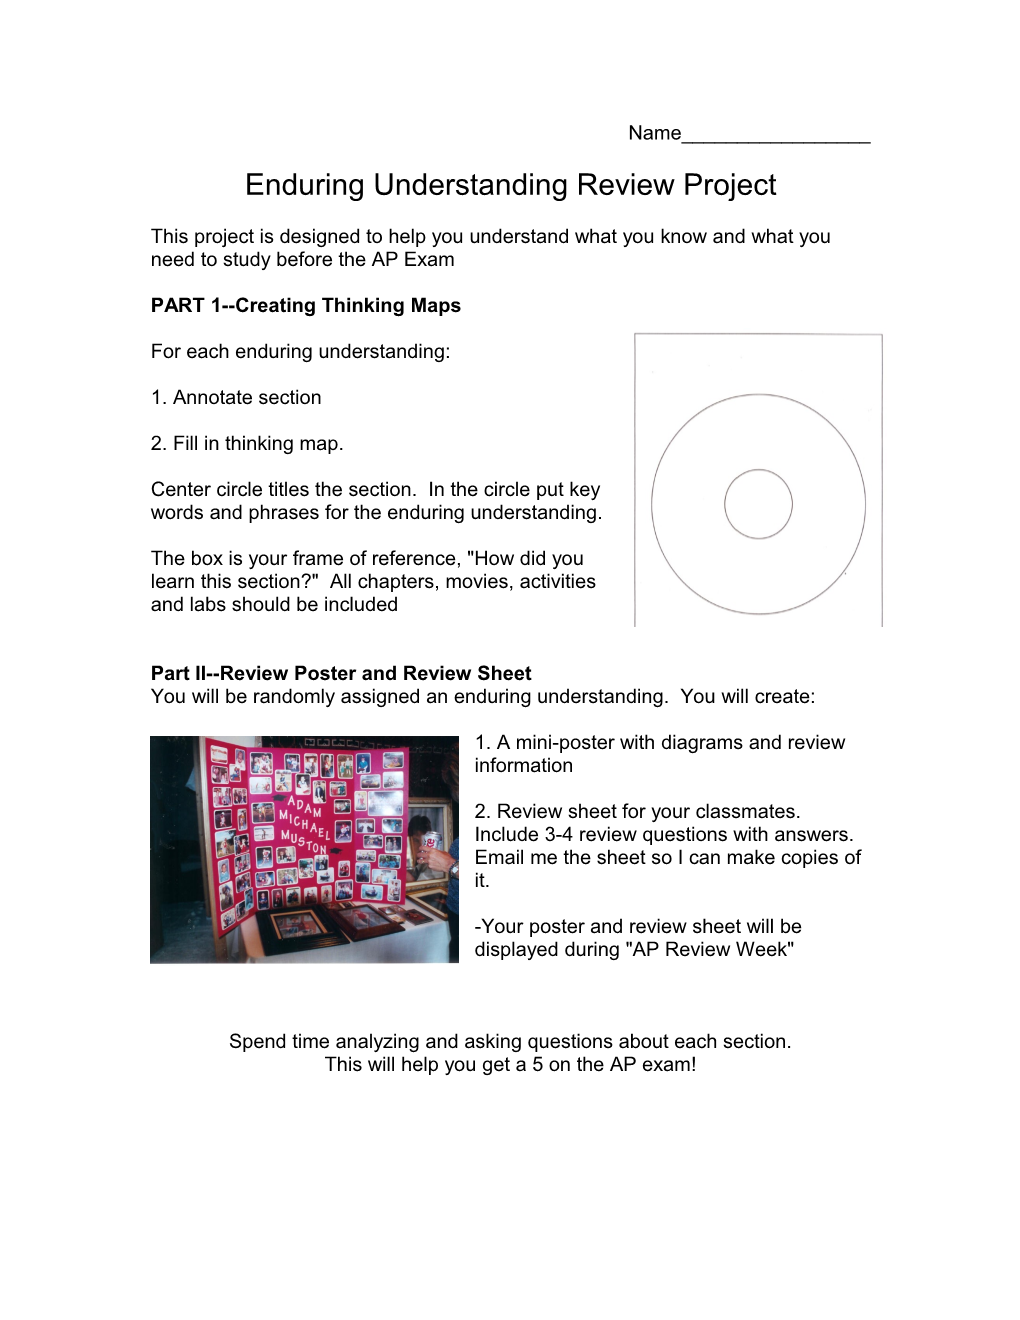 Enduring Understanding Review Project